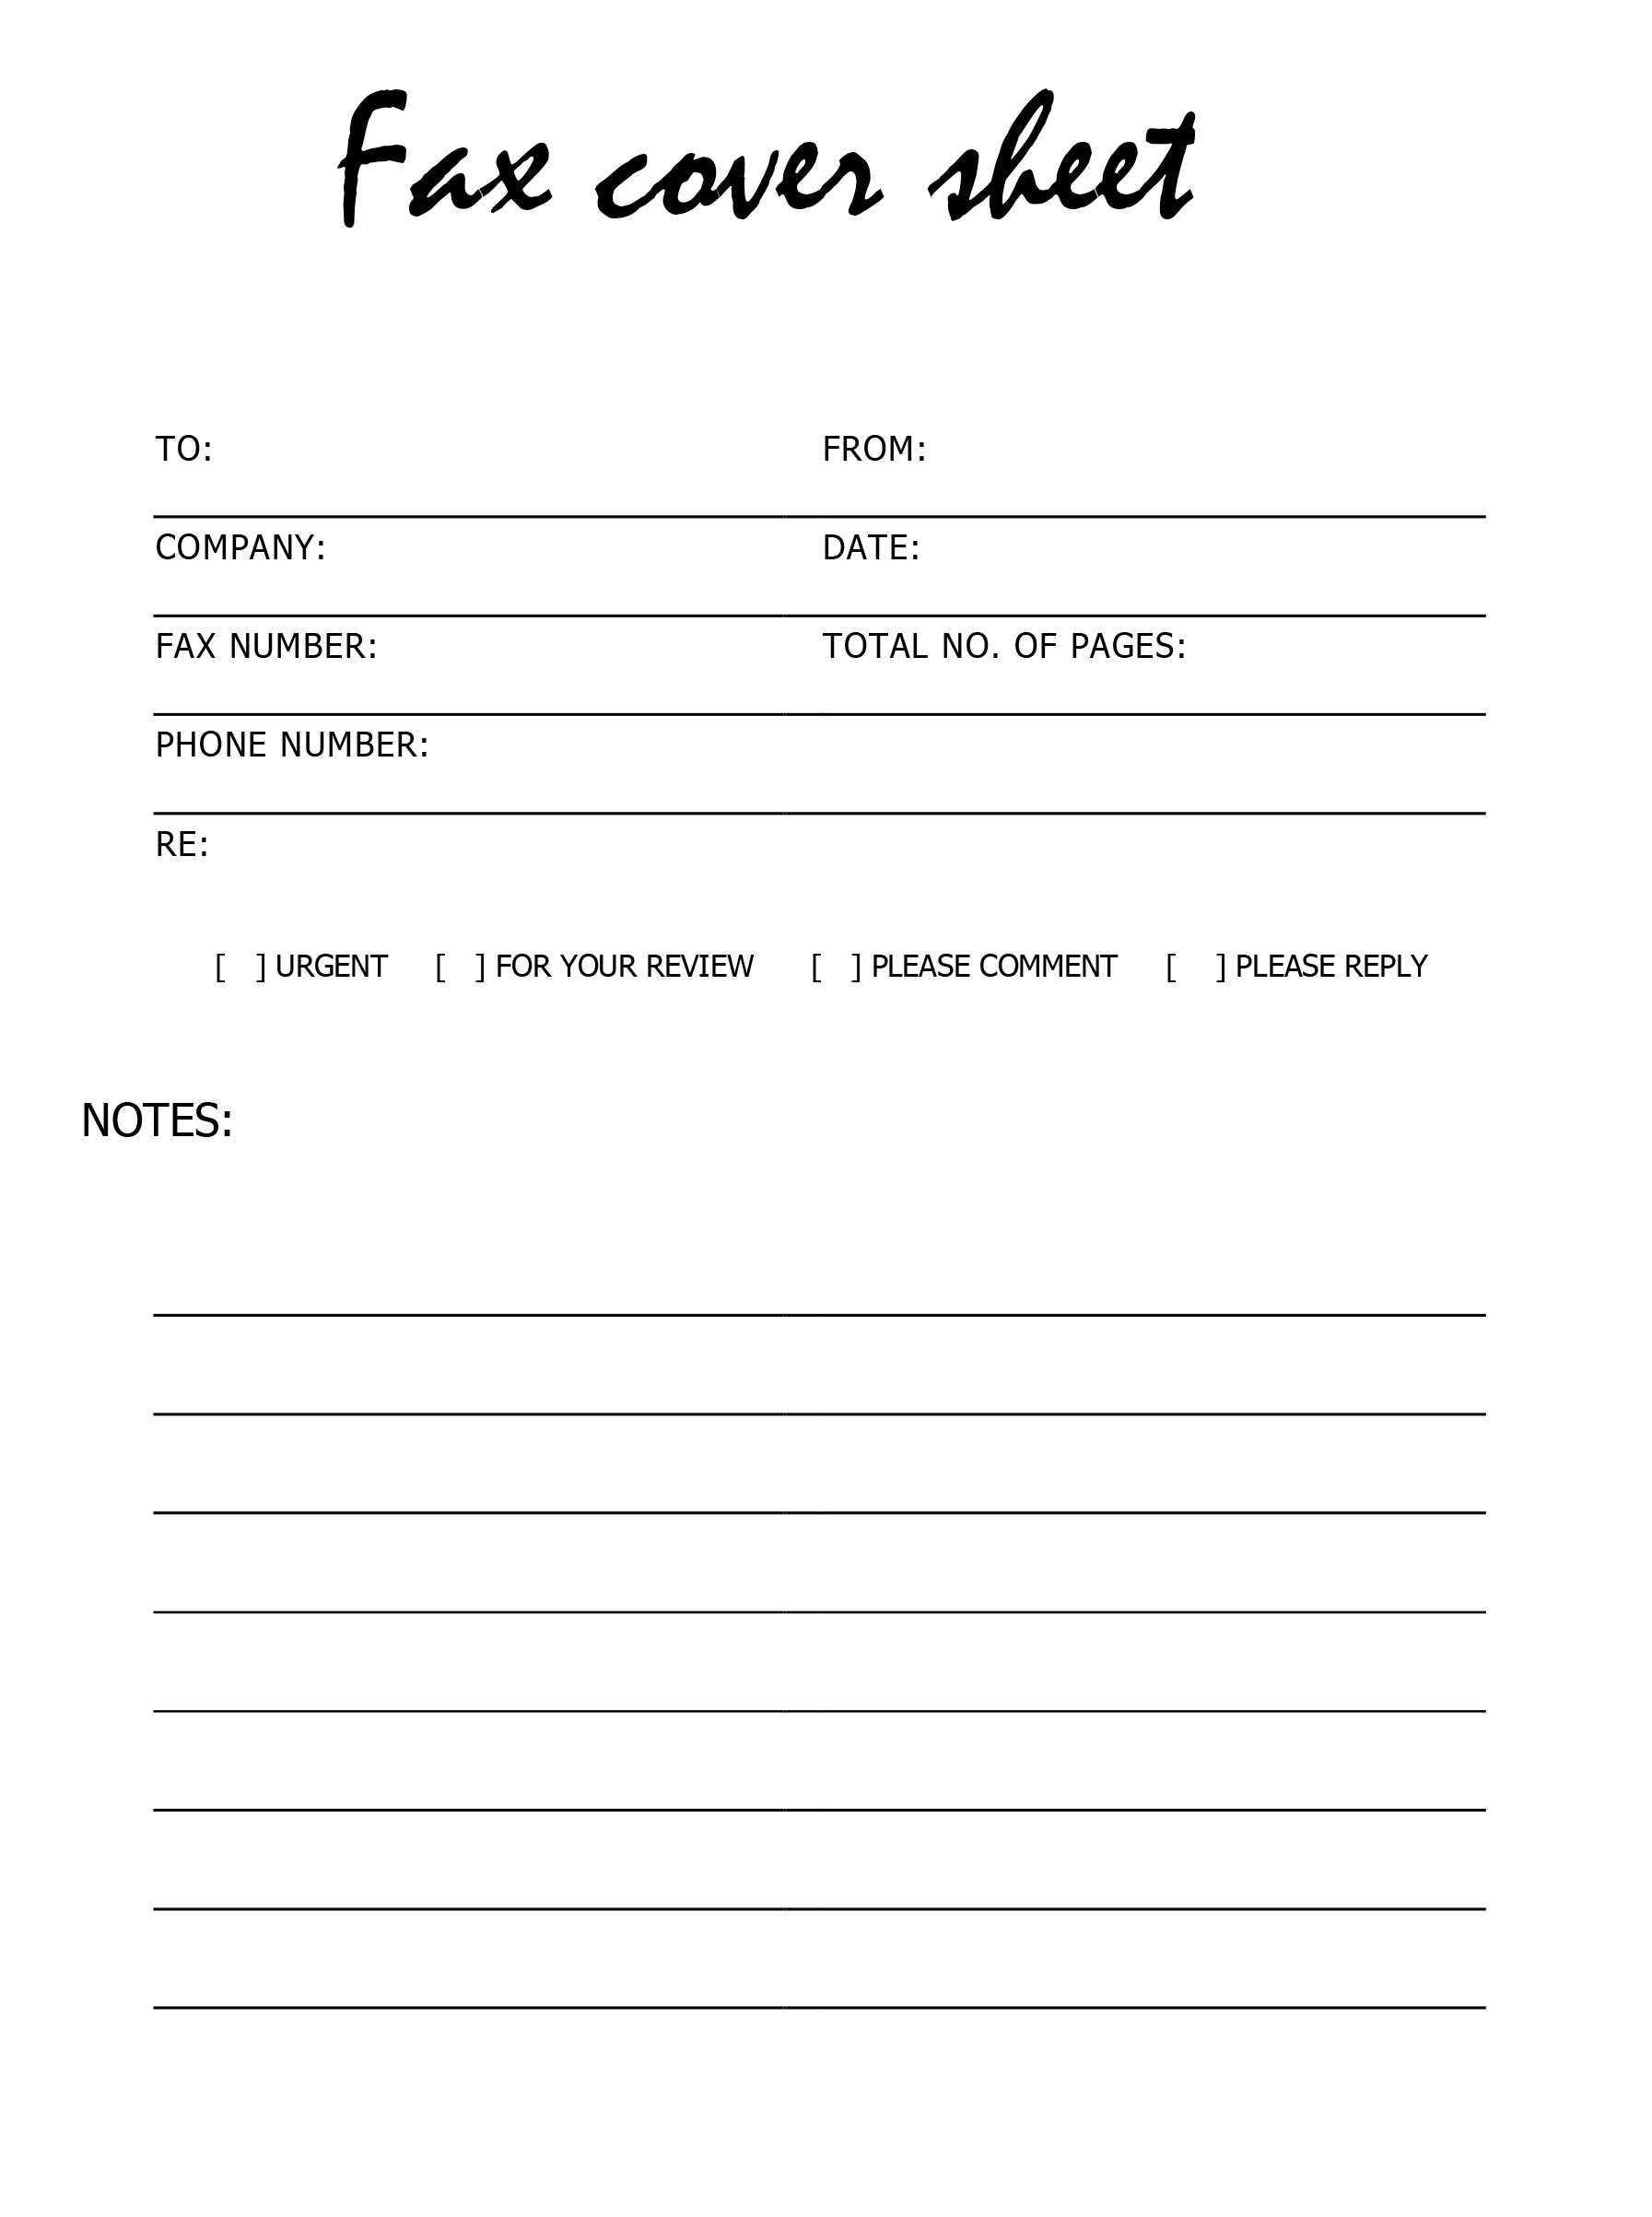 fax-cover-letter-template-free